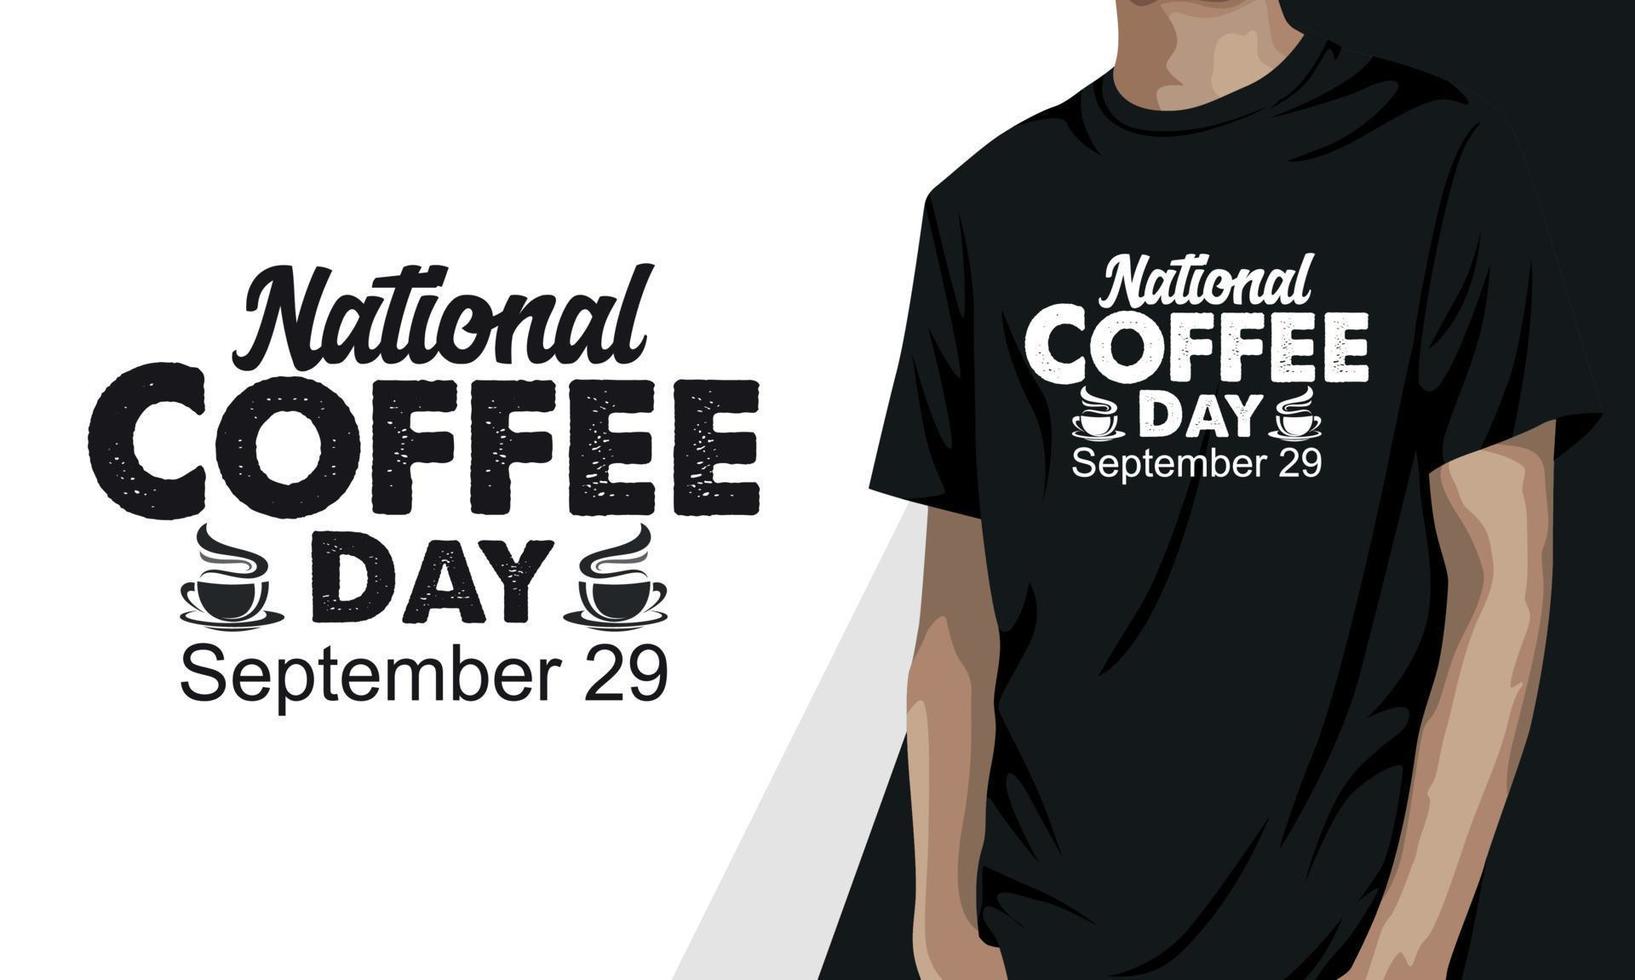 National Coffee Day  September 29, coffee t-shirt design vector